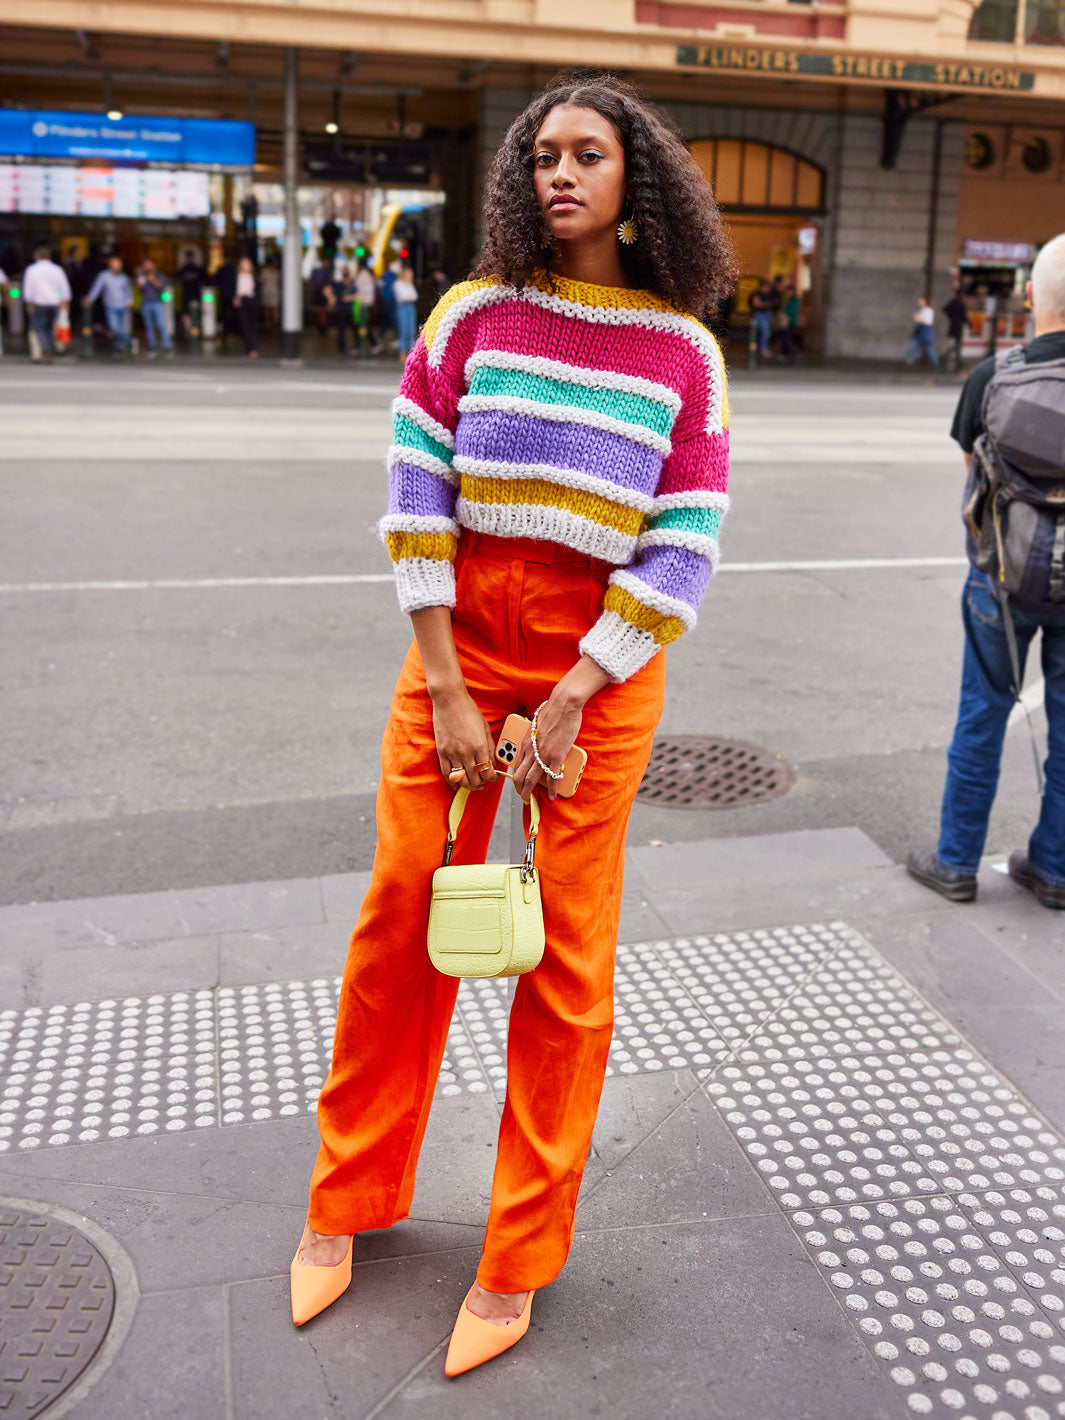 Woman leans on pole at road crossing holding a yellow handbag and wearing orange pants and a brightly coloured hand knitted jumper